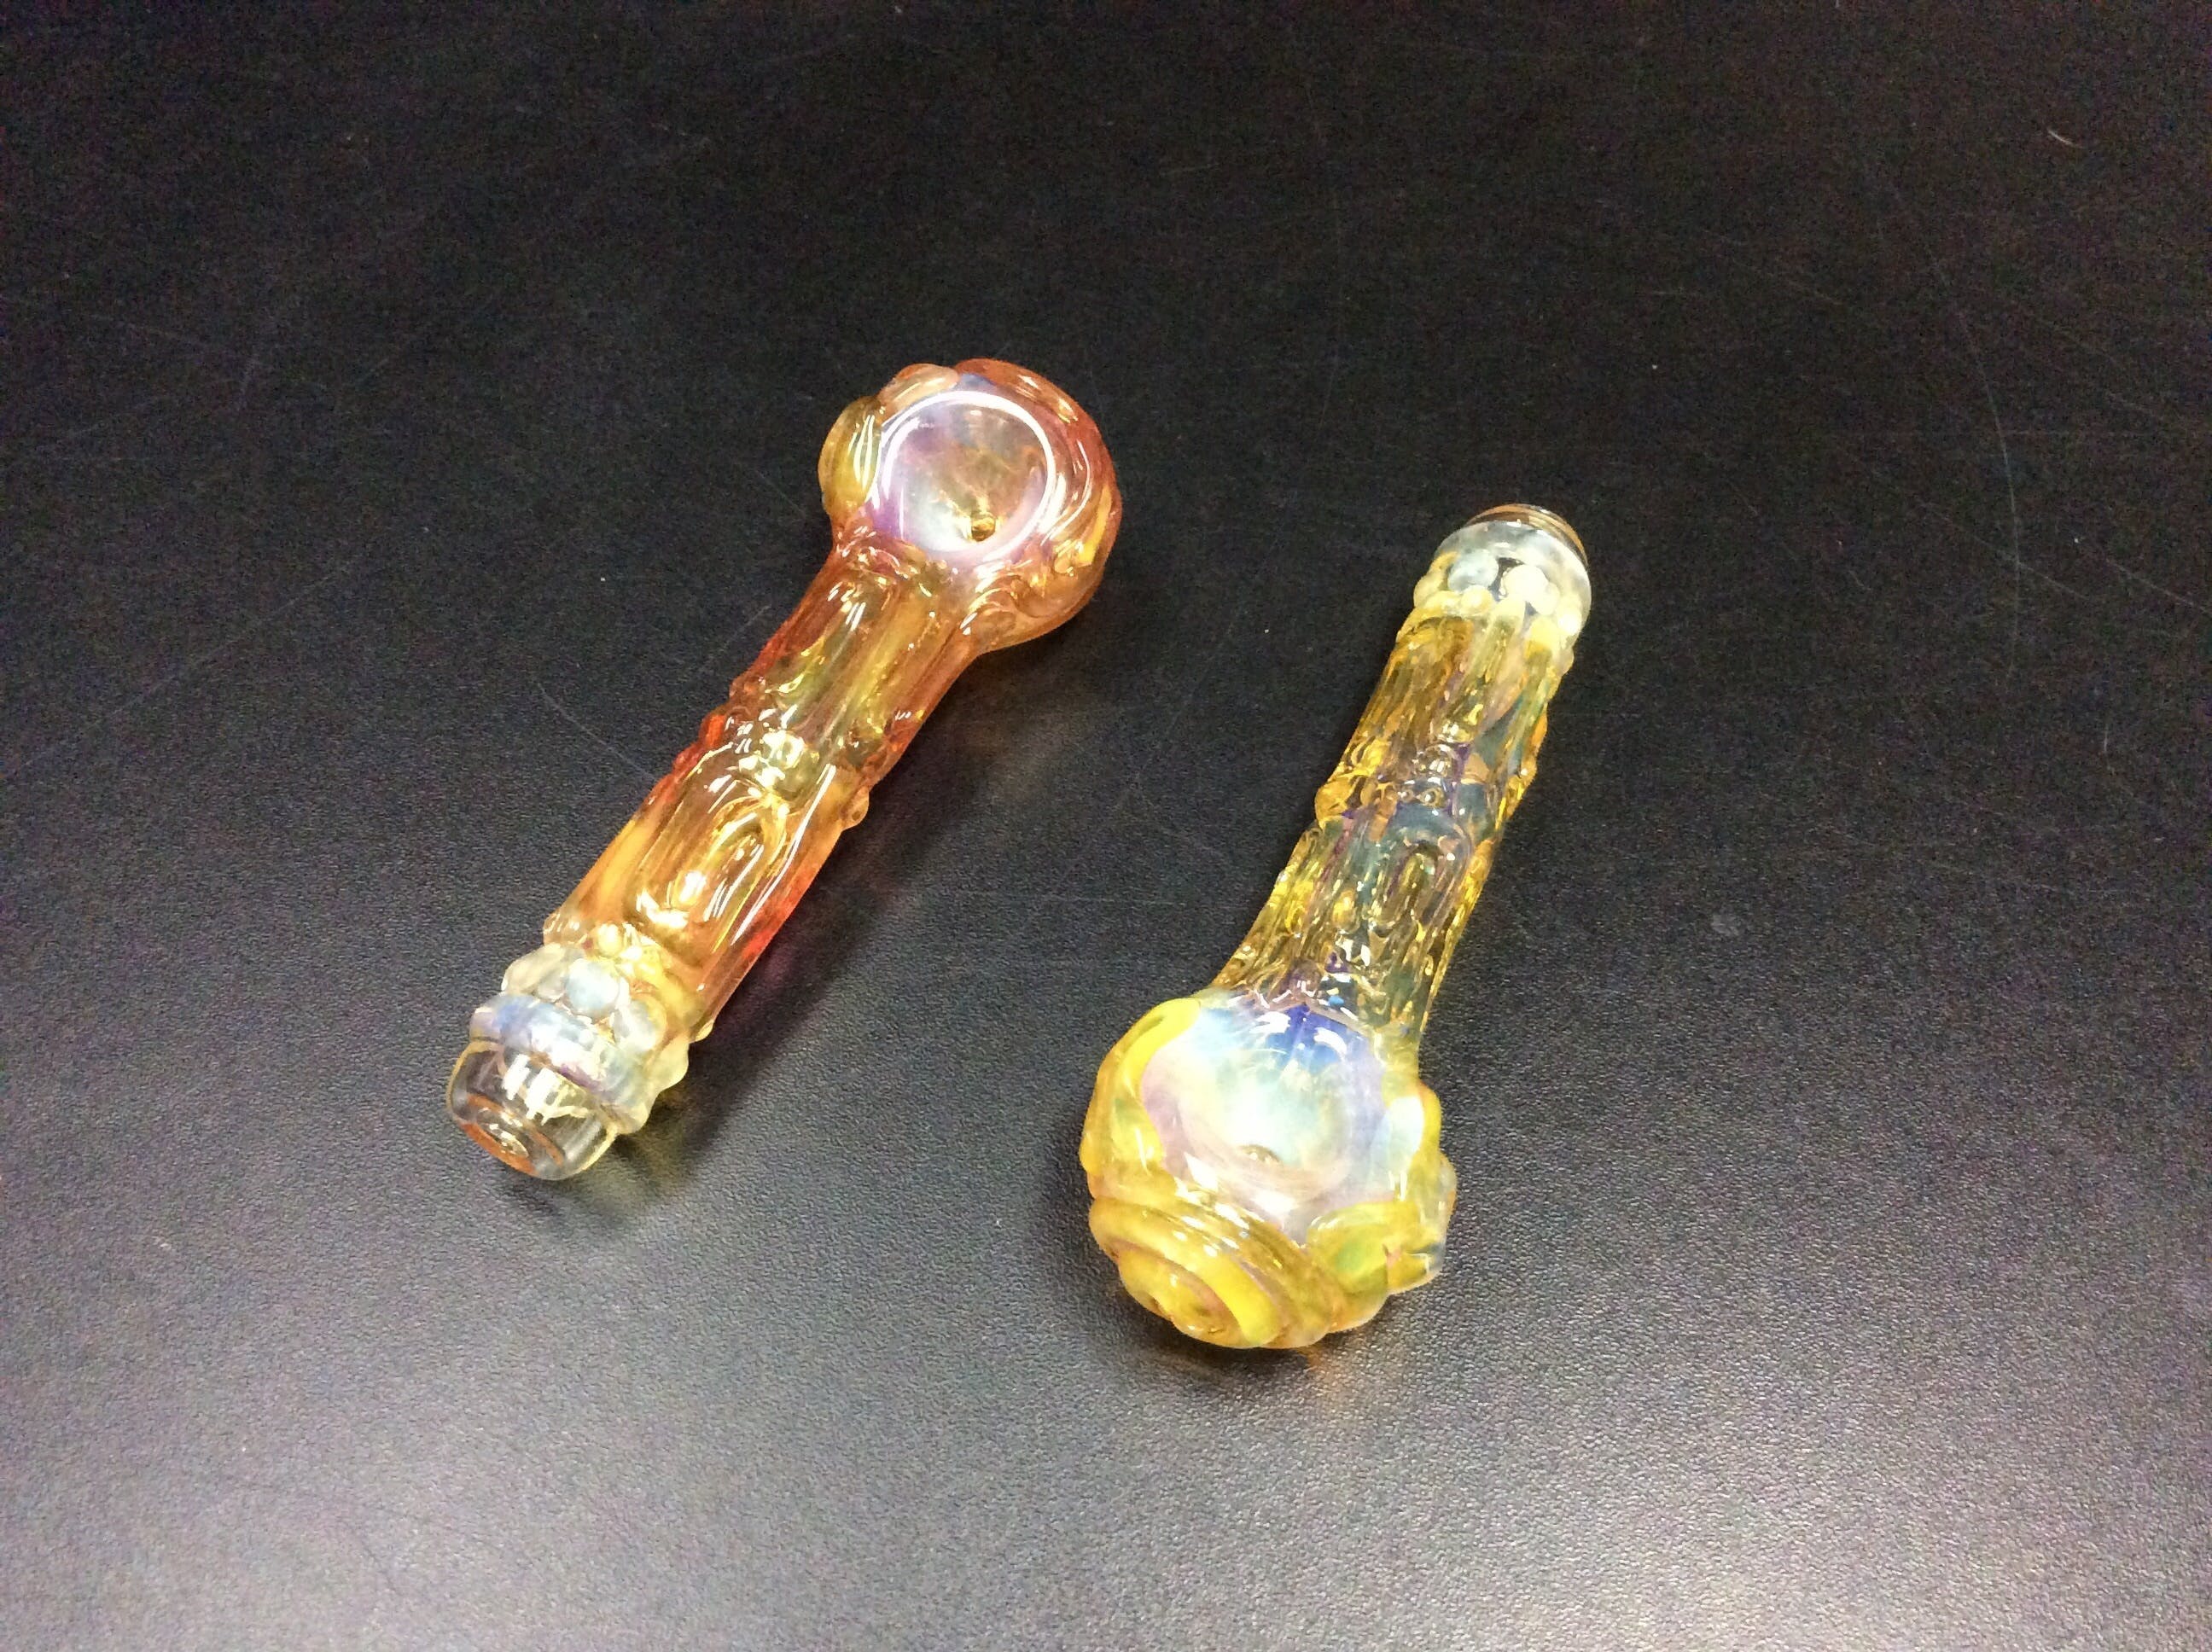 gear-aztec-design-glass-pipes